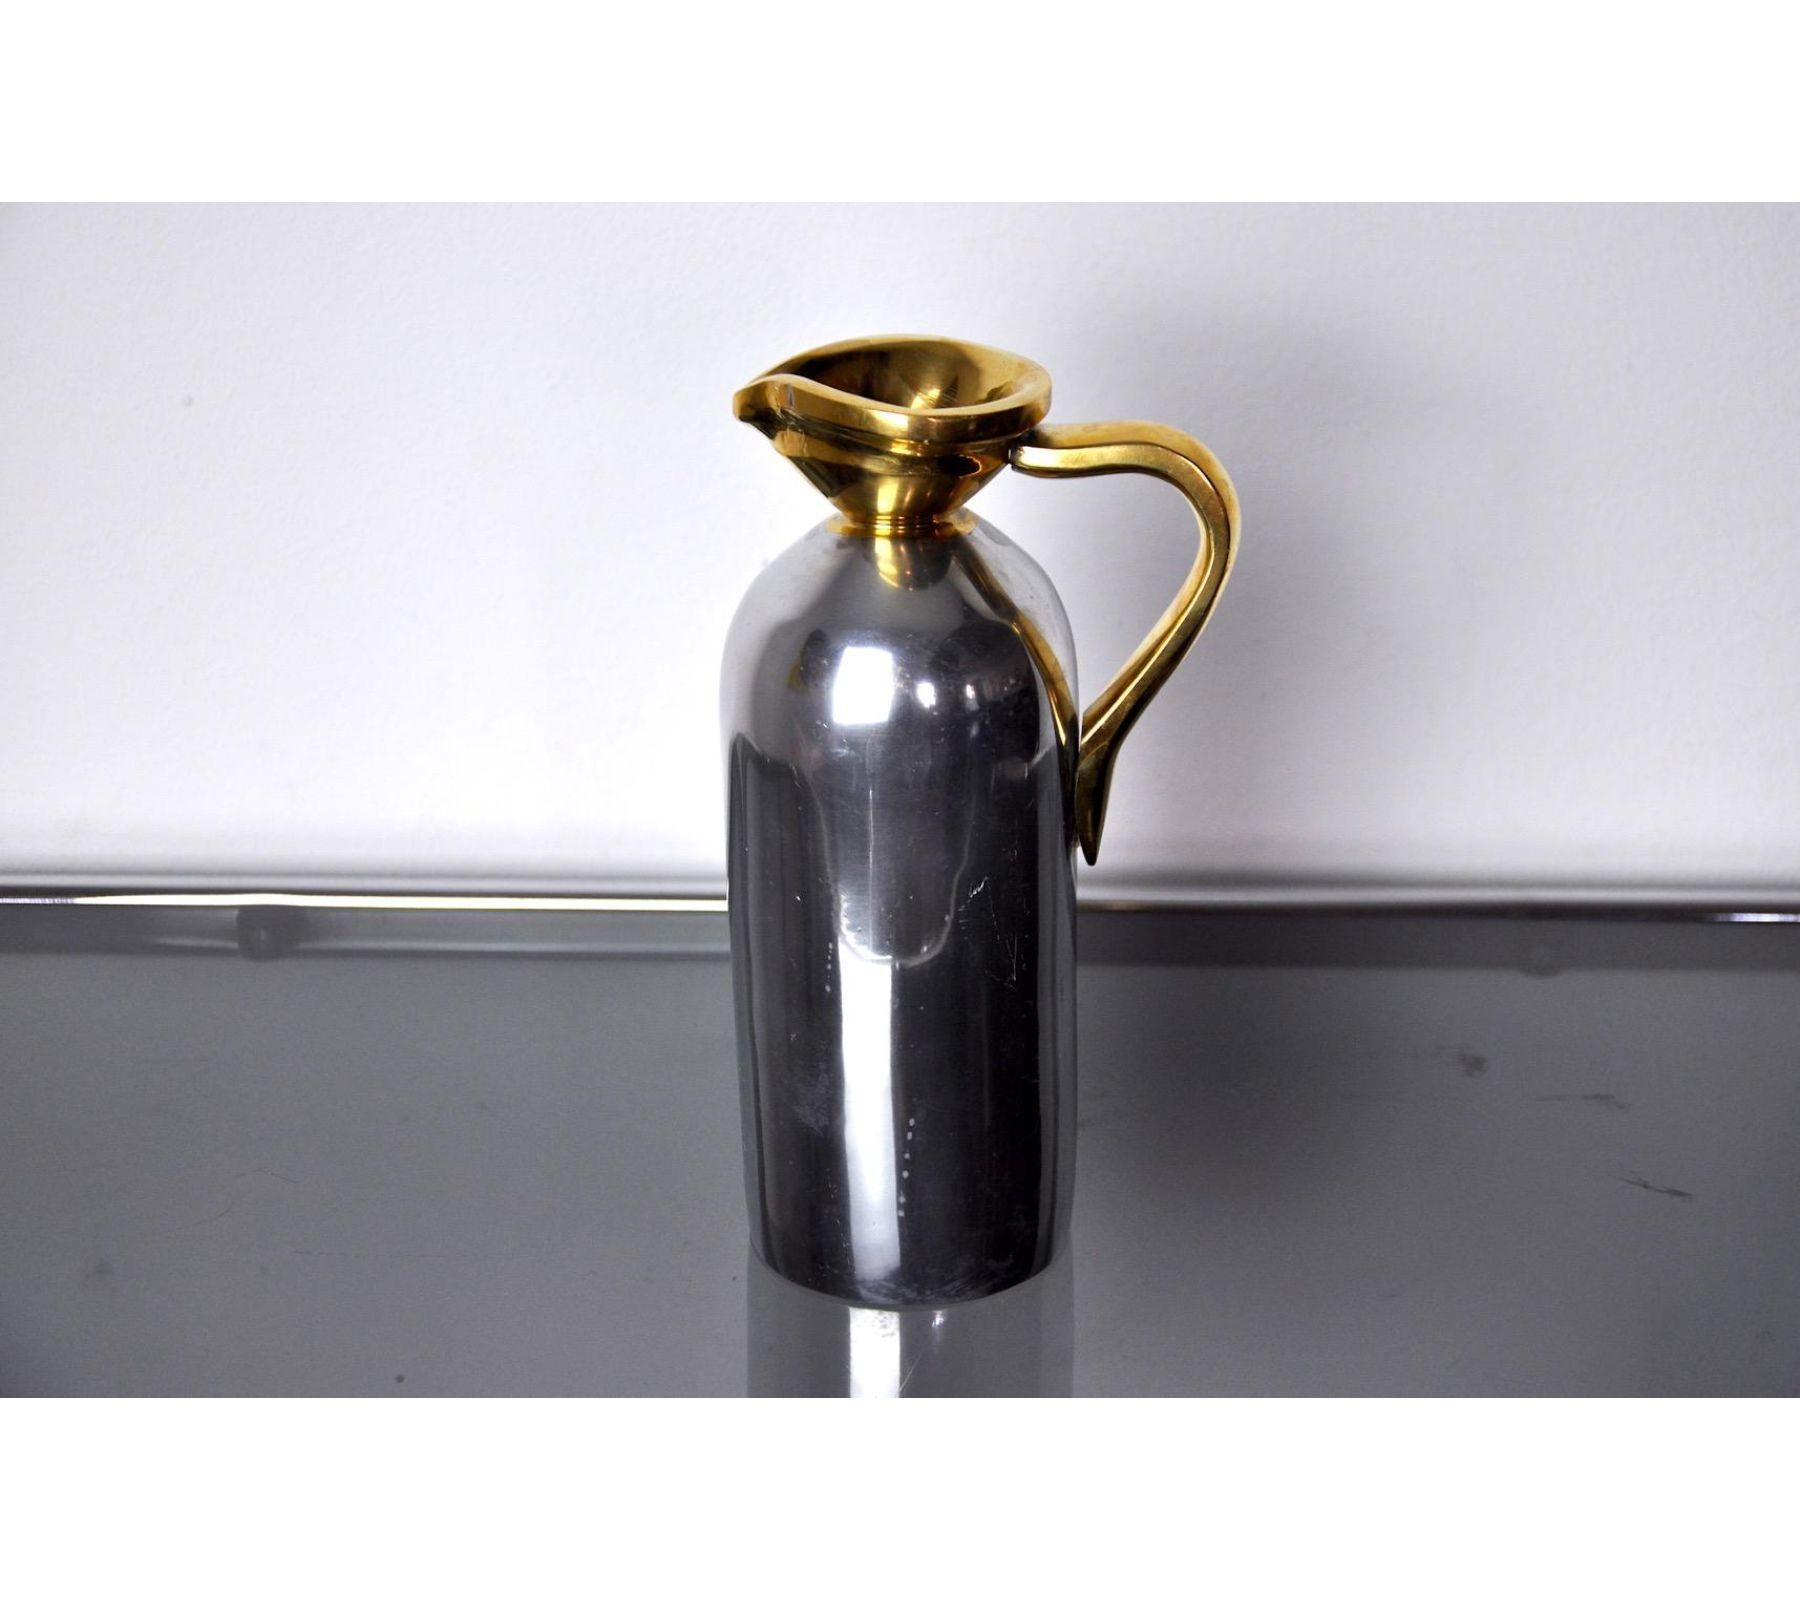 Superb jar or carafe brutalise designated and made by the artist David Marshall around the 80s, Spain. Rare works of the artist in brass and silver metal.